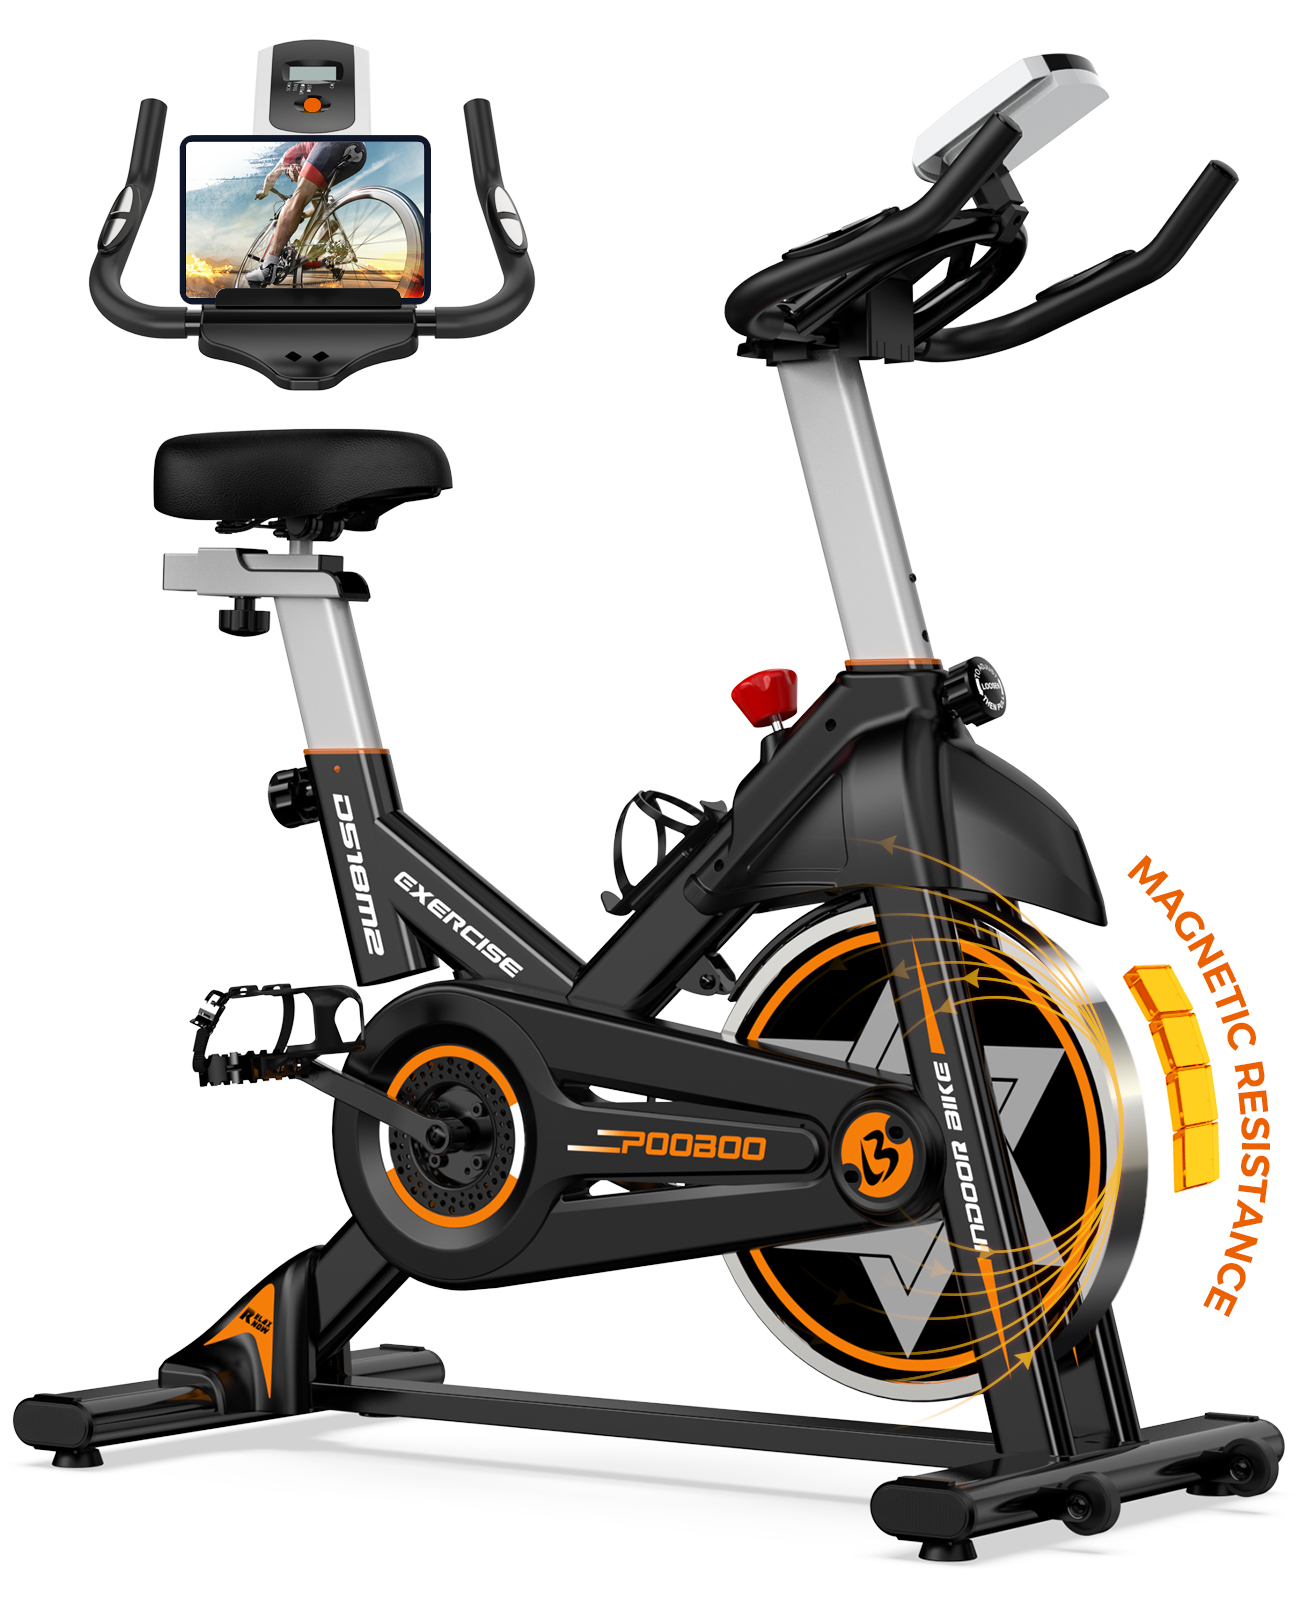 Pooboo Magnetic Exercise Bike Indoor Cycling Bike for Home Cardio Workout Stationary Bike Heavy-Duty Flywheel Quiet Belt Drive - image 1 of 11